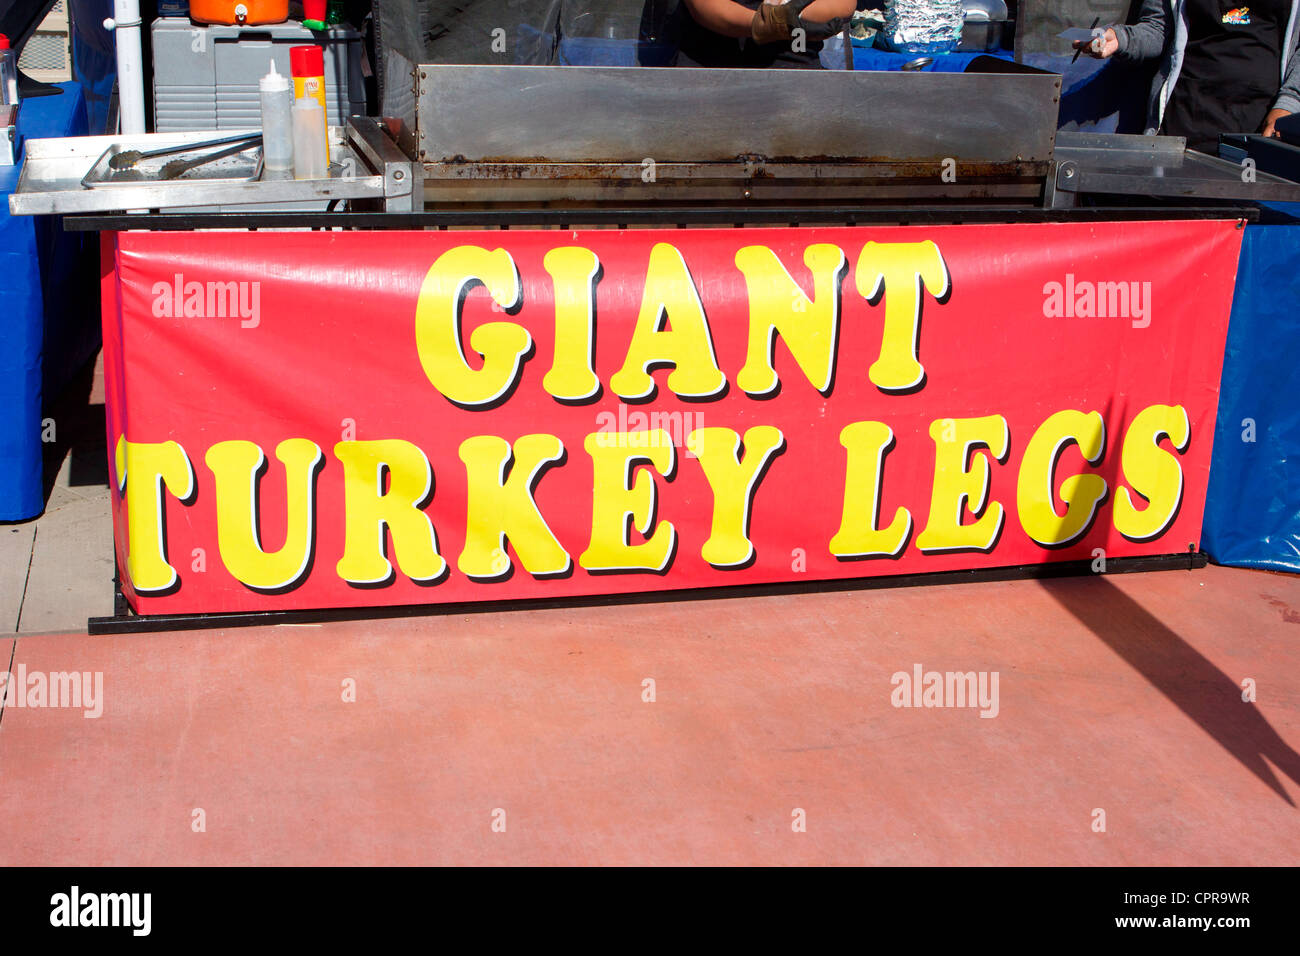 Giant cooked turkey legs for sale at at the Scottish Festival Orange County Fairgrounds Costa Mesa, California. Stock Photo